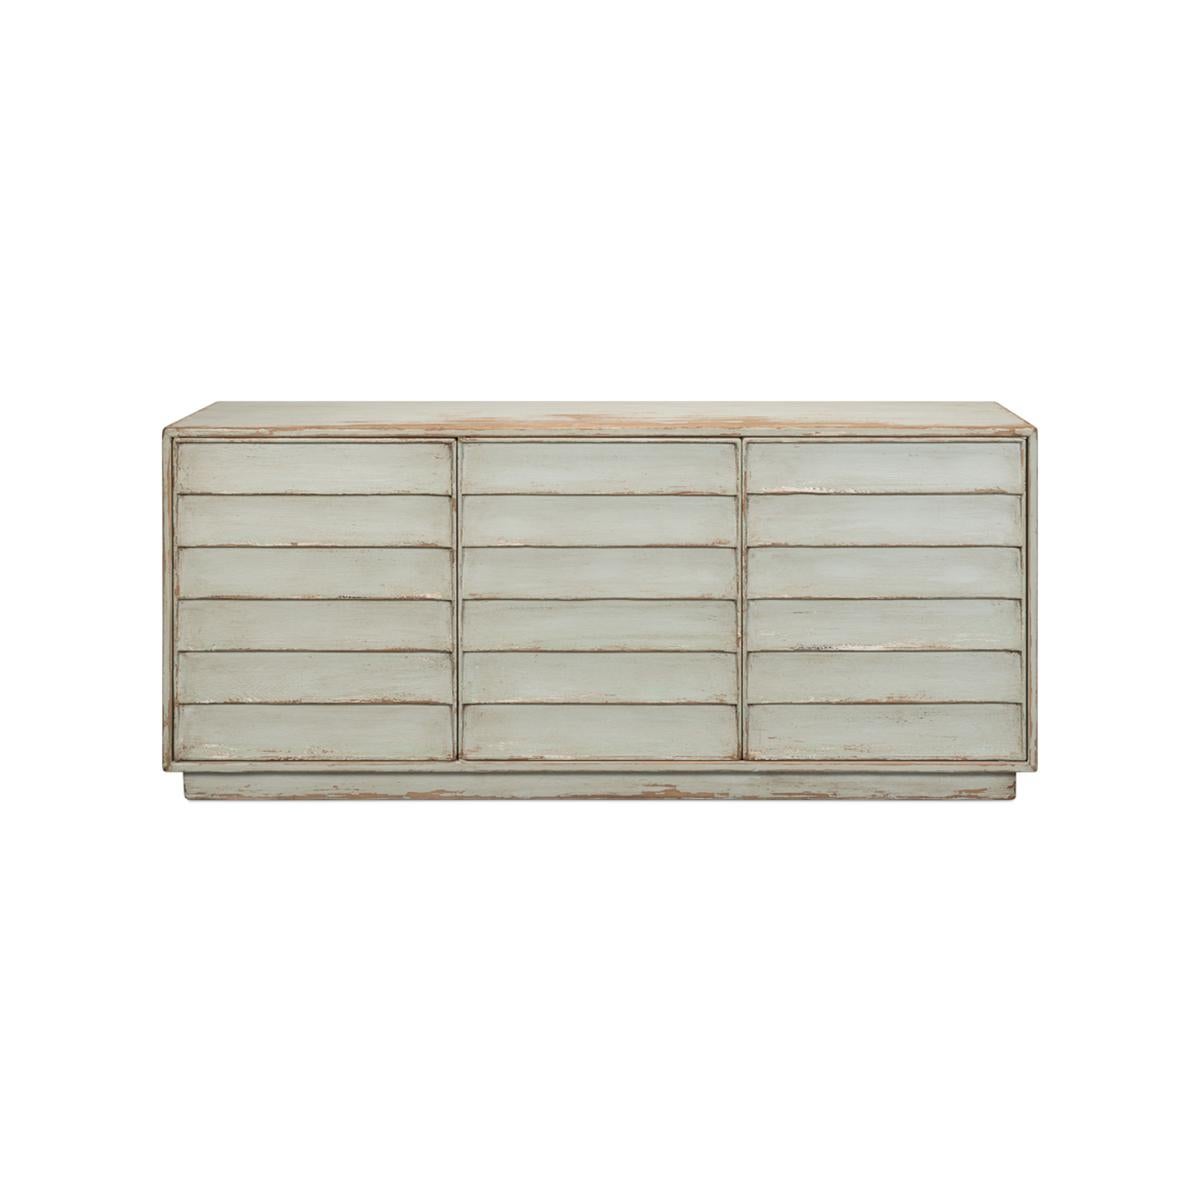 Made with reclaimed pine in an antiqued and distressed finish sage paint color. Three cabinet doors open to reveal a painted interior with removable shelves. The cabinet is raised on a square stepped-back plinth base.

Dimensions: 74